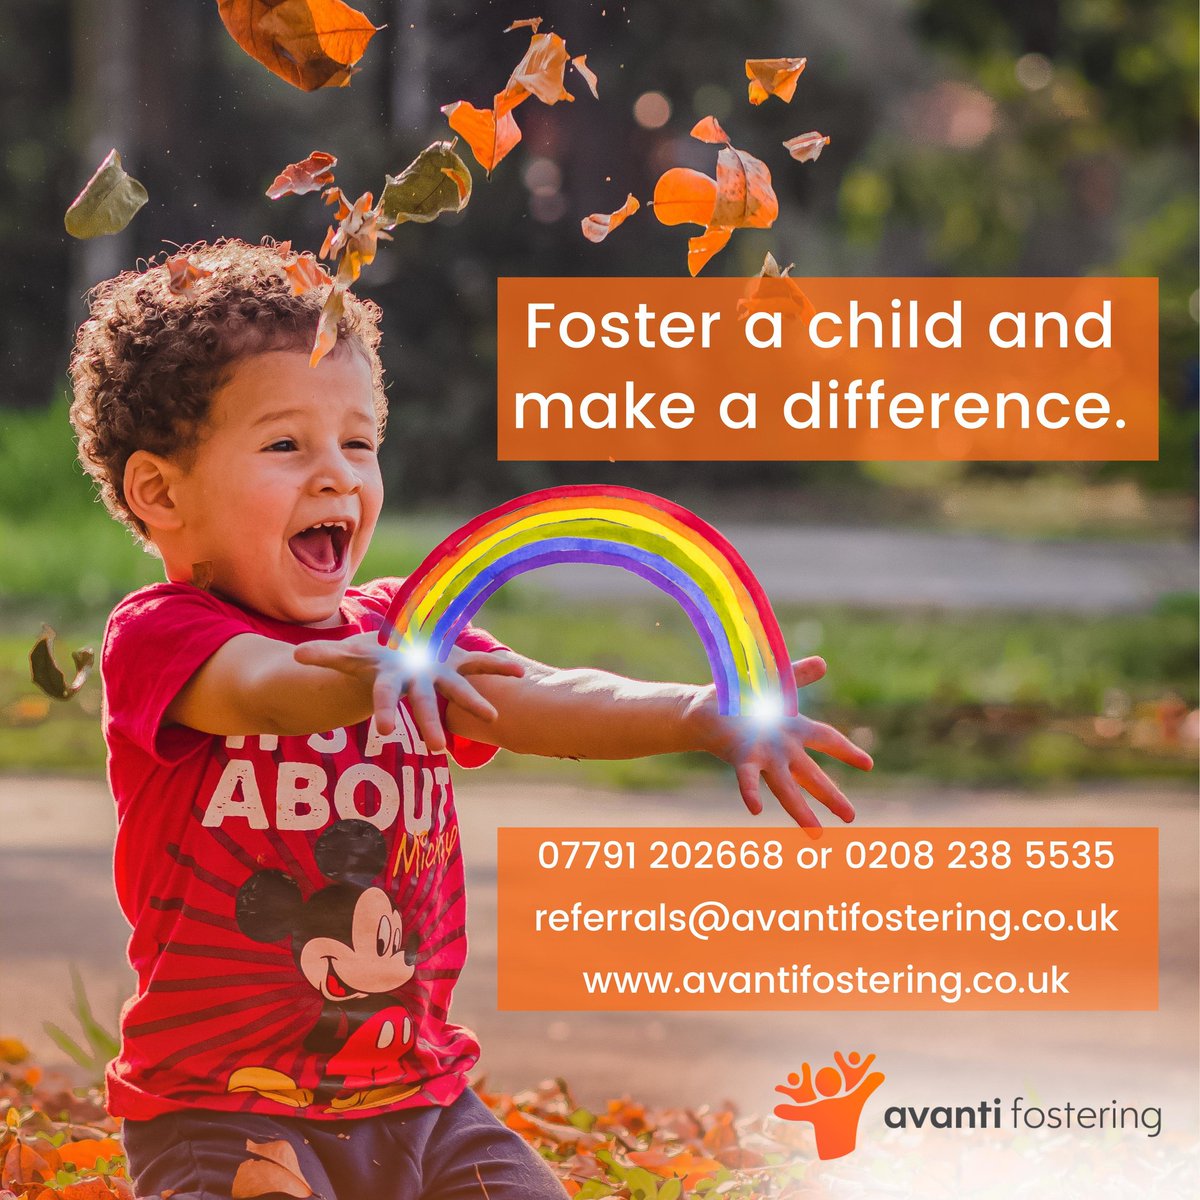 We are looking for new and existing foster carers to keep a child’s future bright. @avantifostering provide all the support you need to foster with us.

Find out more information avantifostering.co.uk contact us on 07791 202668 or email us at referrals@avantifostering.co.uk.